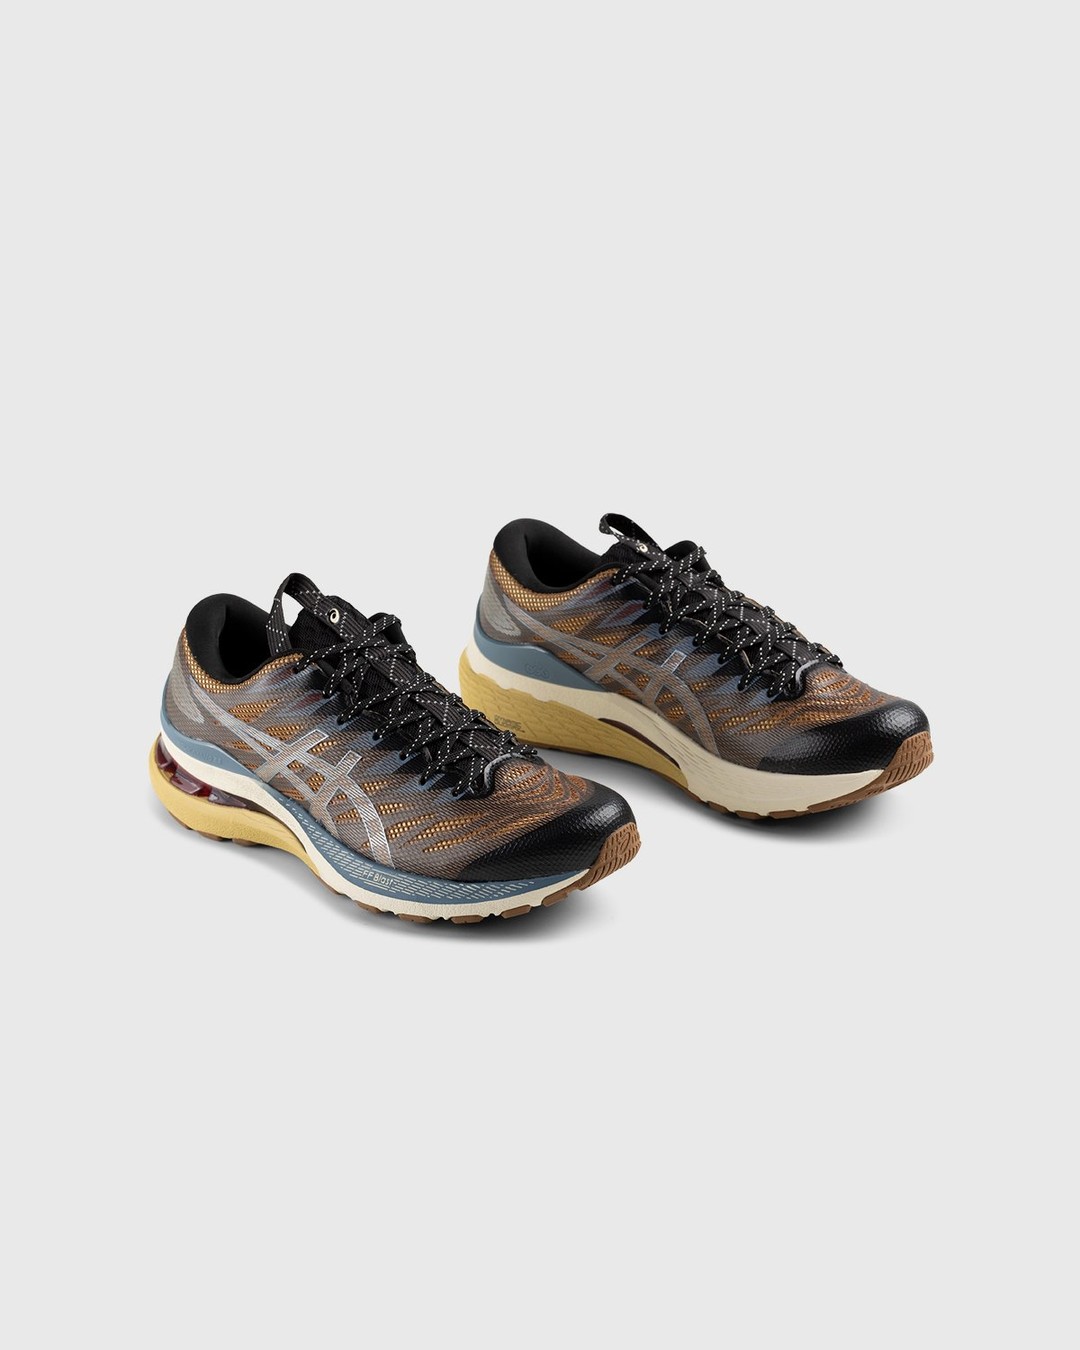 asics – FN3-S Gel Kayano 28 Anthracite/ Antique Gold - Sneakers - Yellow - Image 3